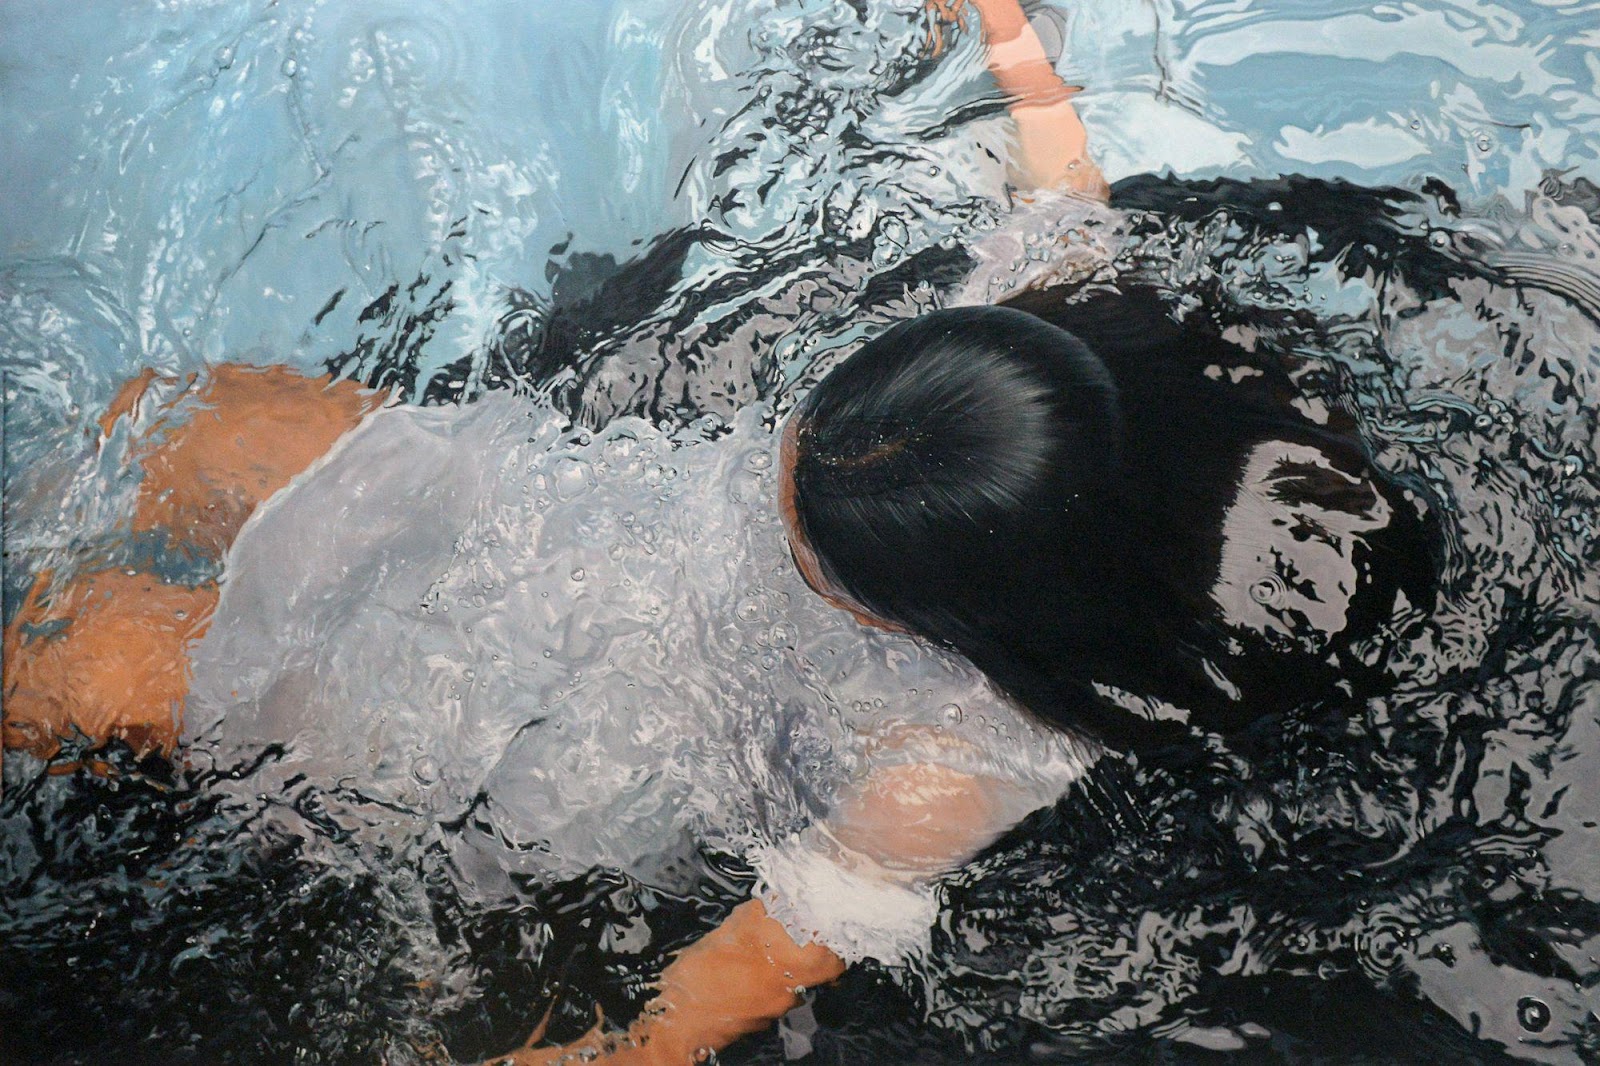 "Adrift" by Sid Natividad, 48 x 72 inches, Oil on canvas